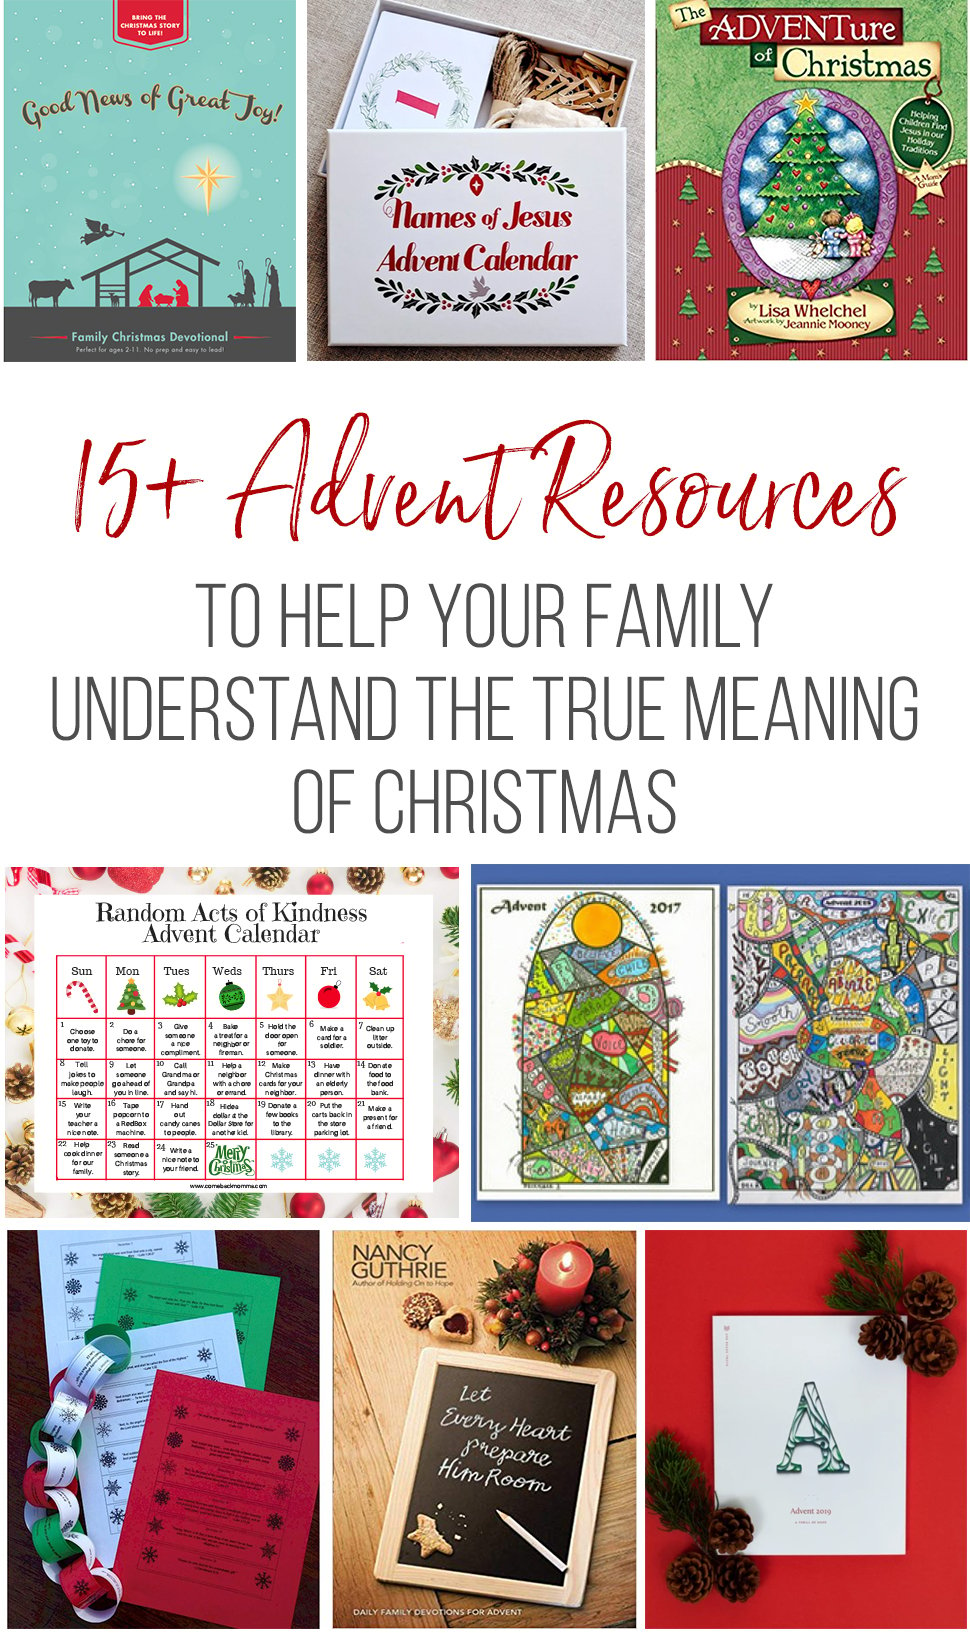 Collage of Advent Resources recommended by Thriving Home.